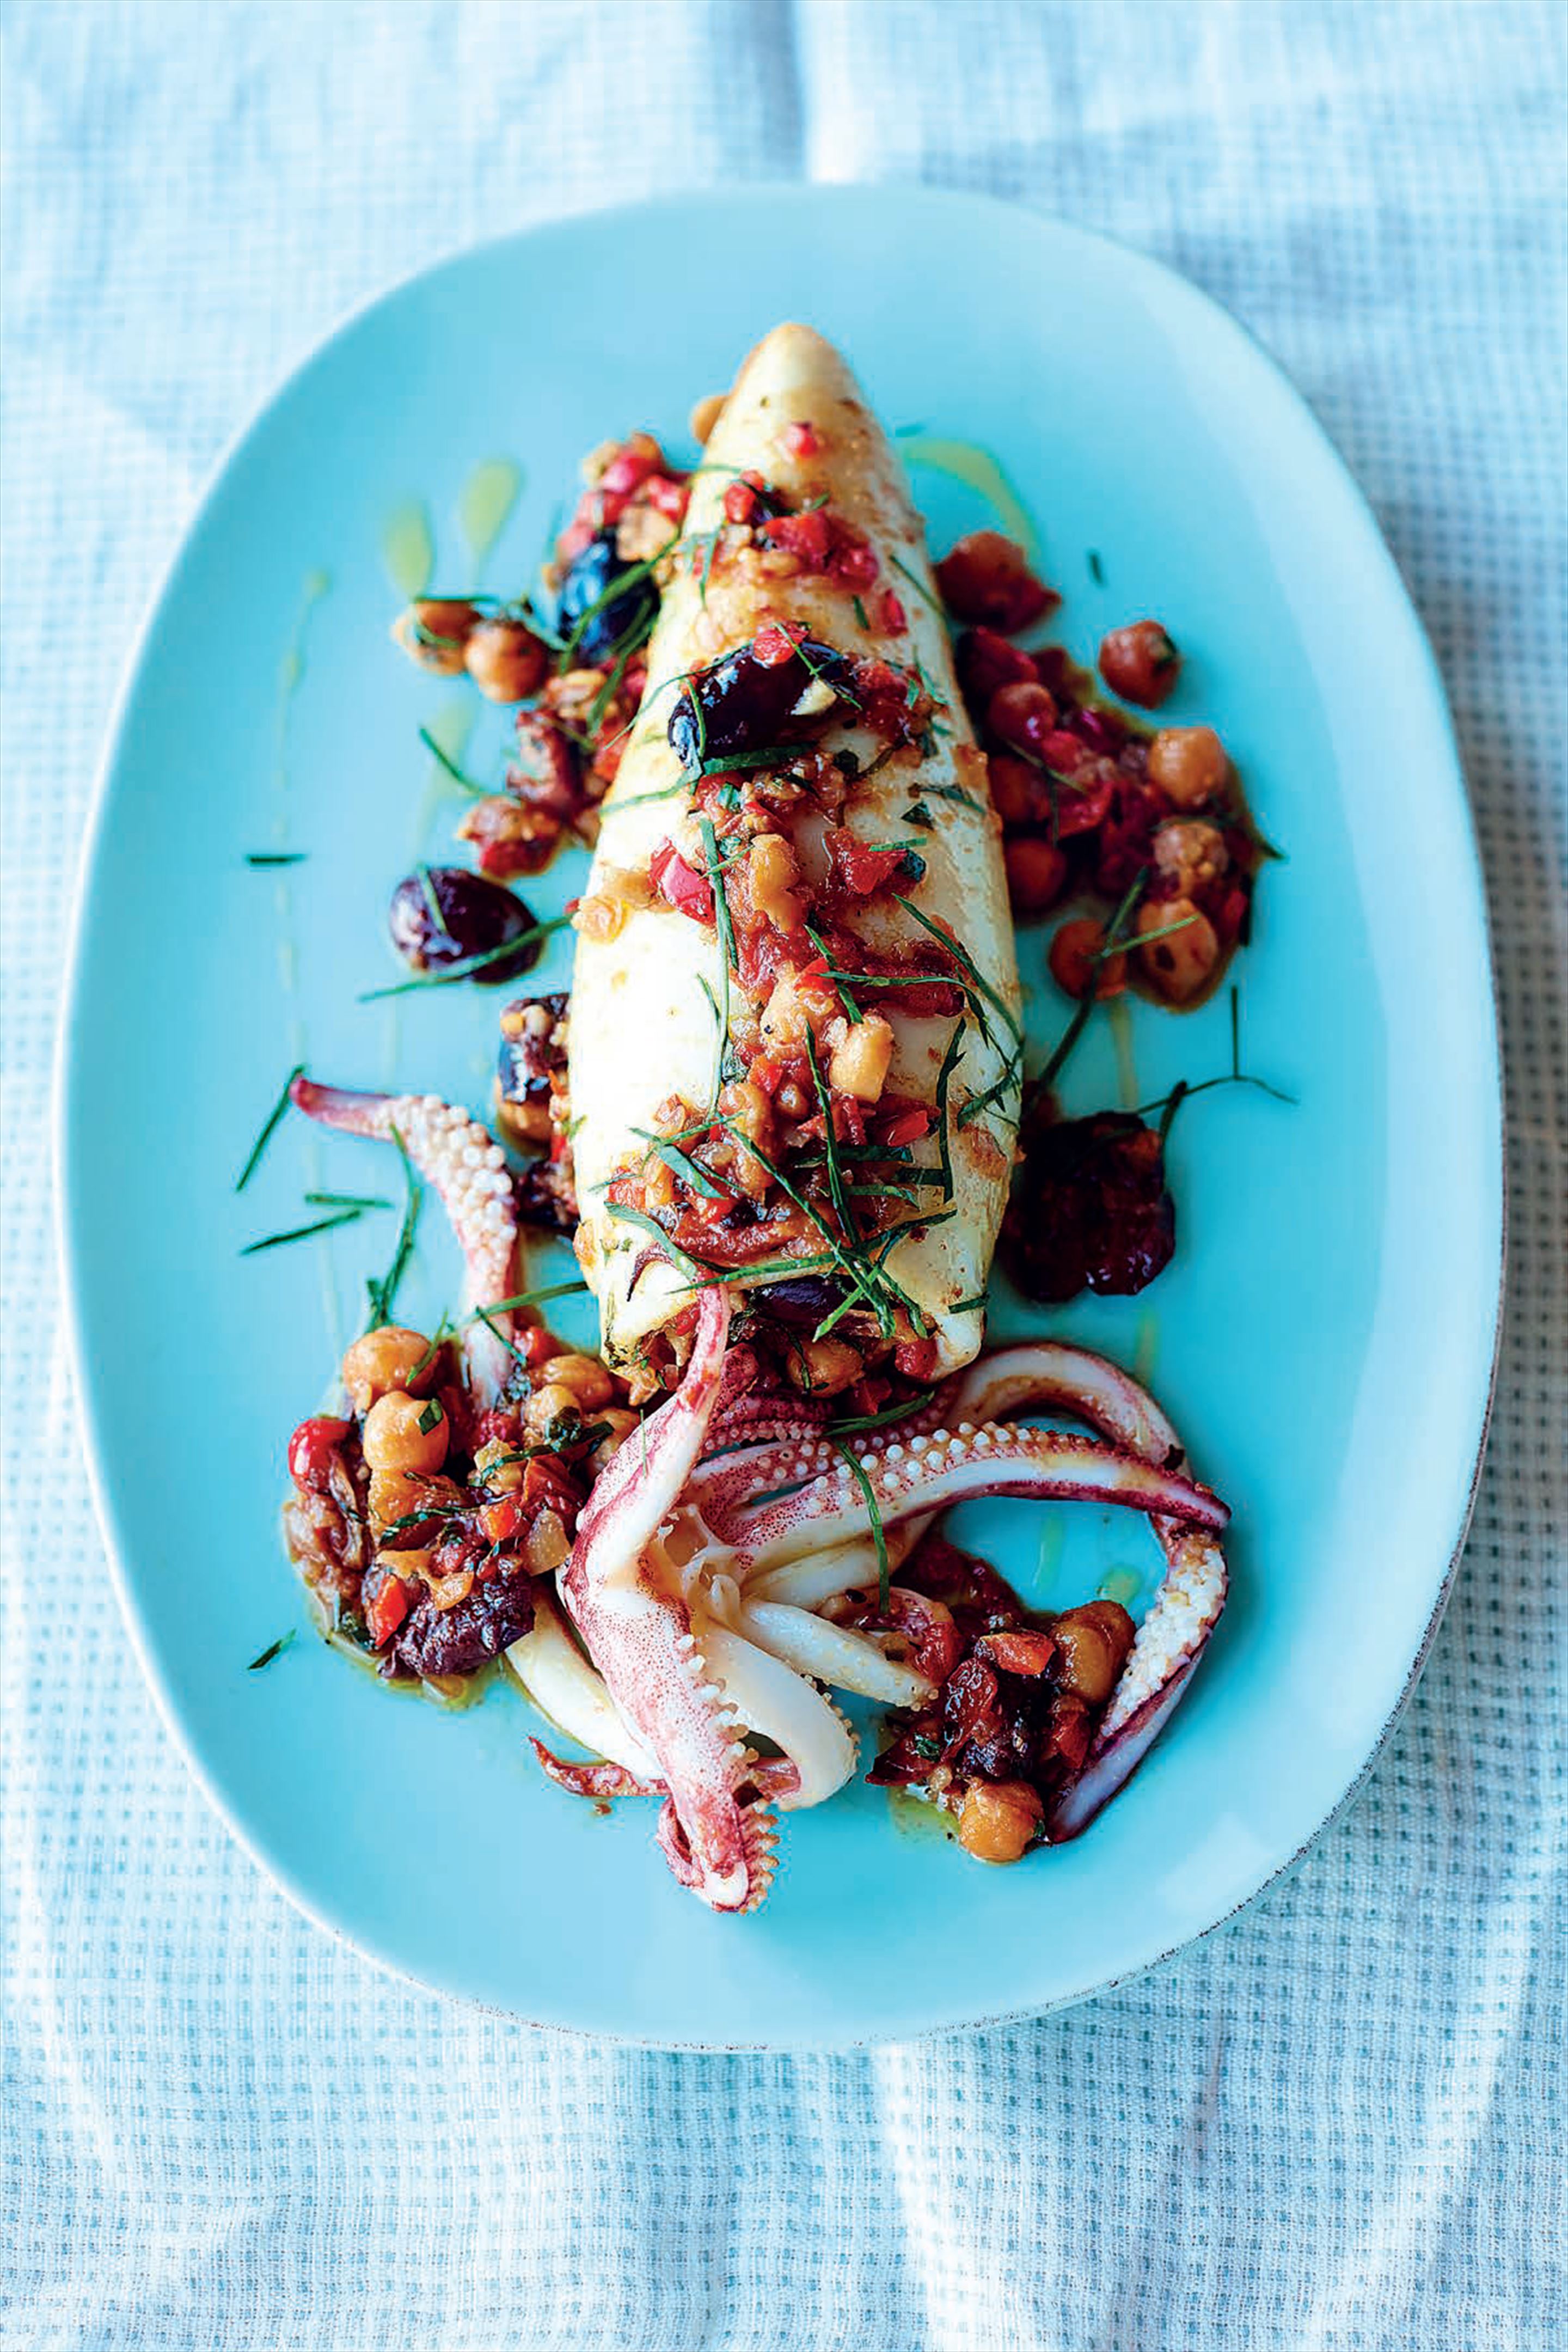 Stuffed squid, red peppers, chickpeas, olives and sherry